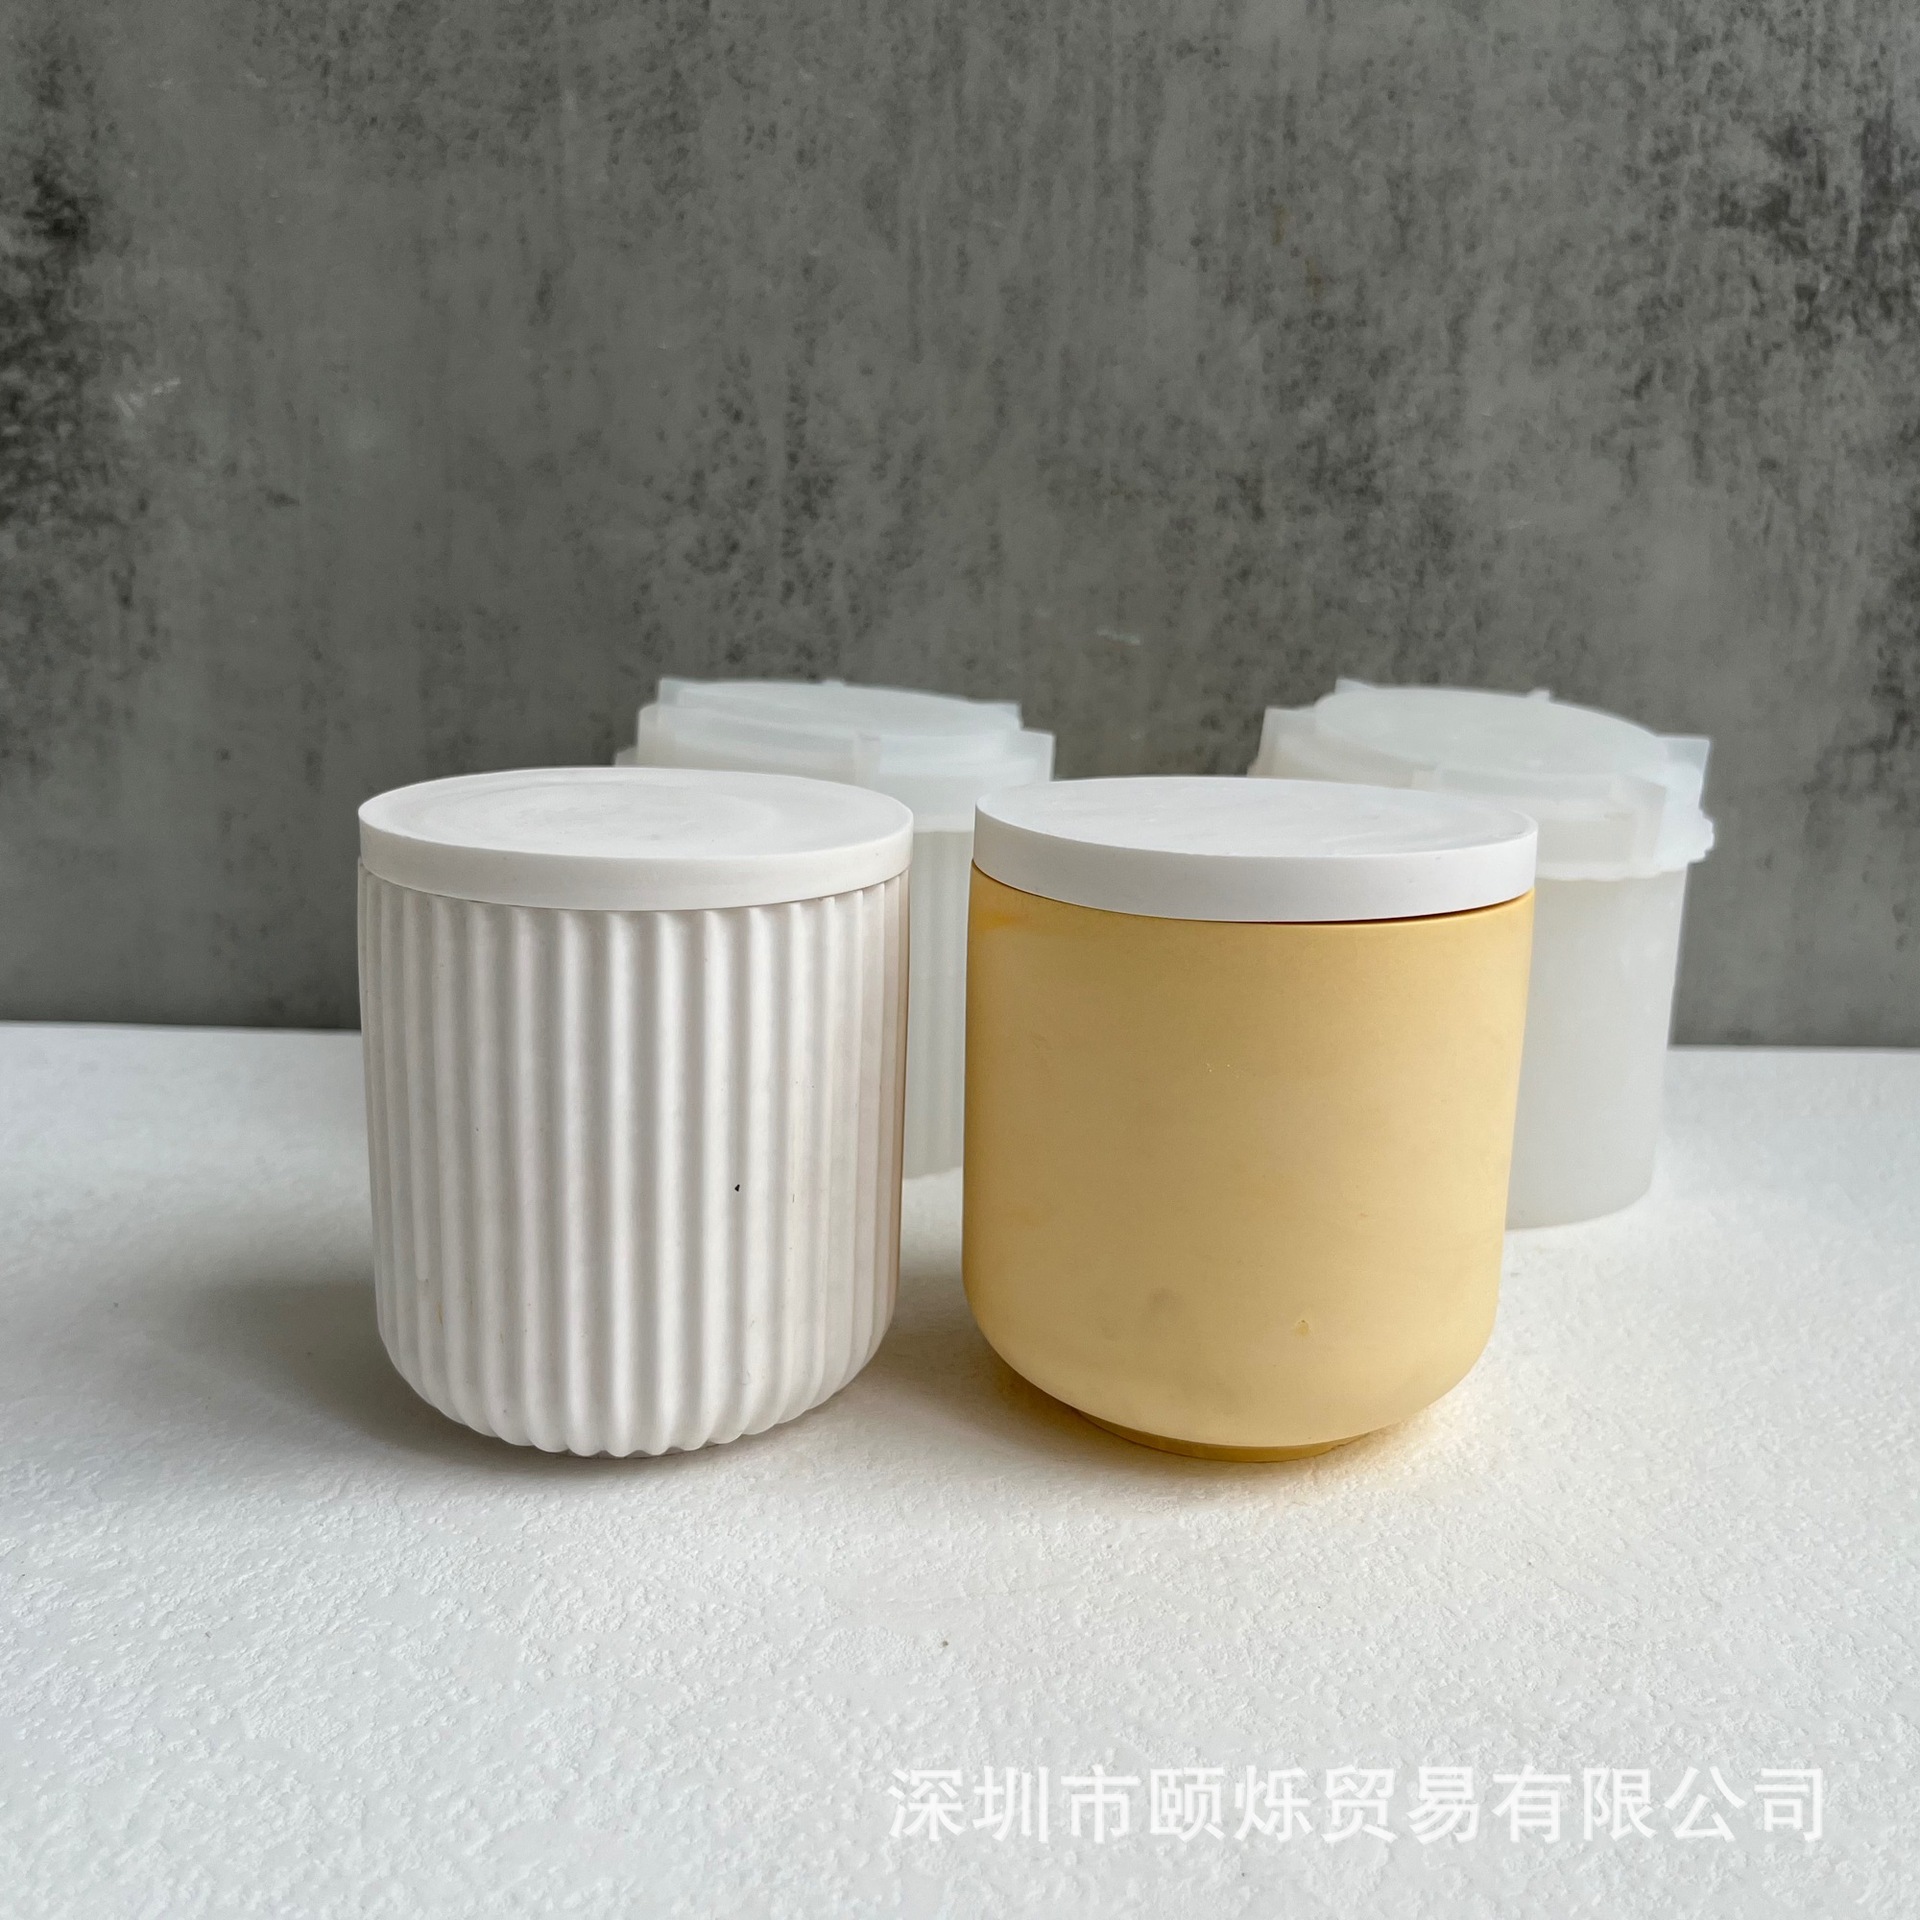 Round with Lid Candle Cup Silicone Mold Storage Box Vertical Stripes Thin Mirror Epoxy Plaster Mold New